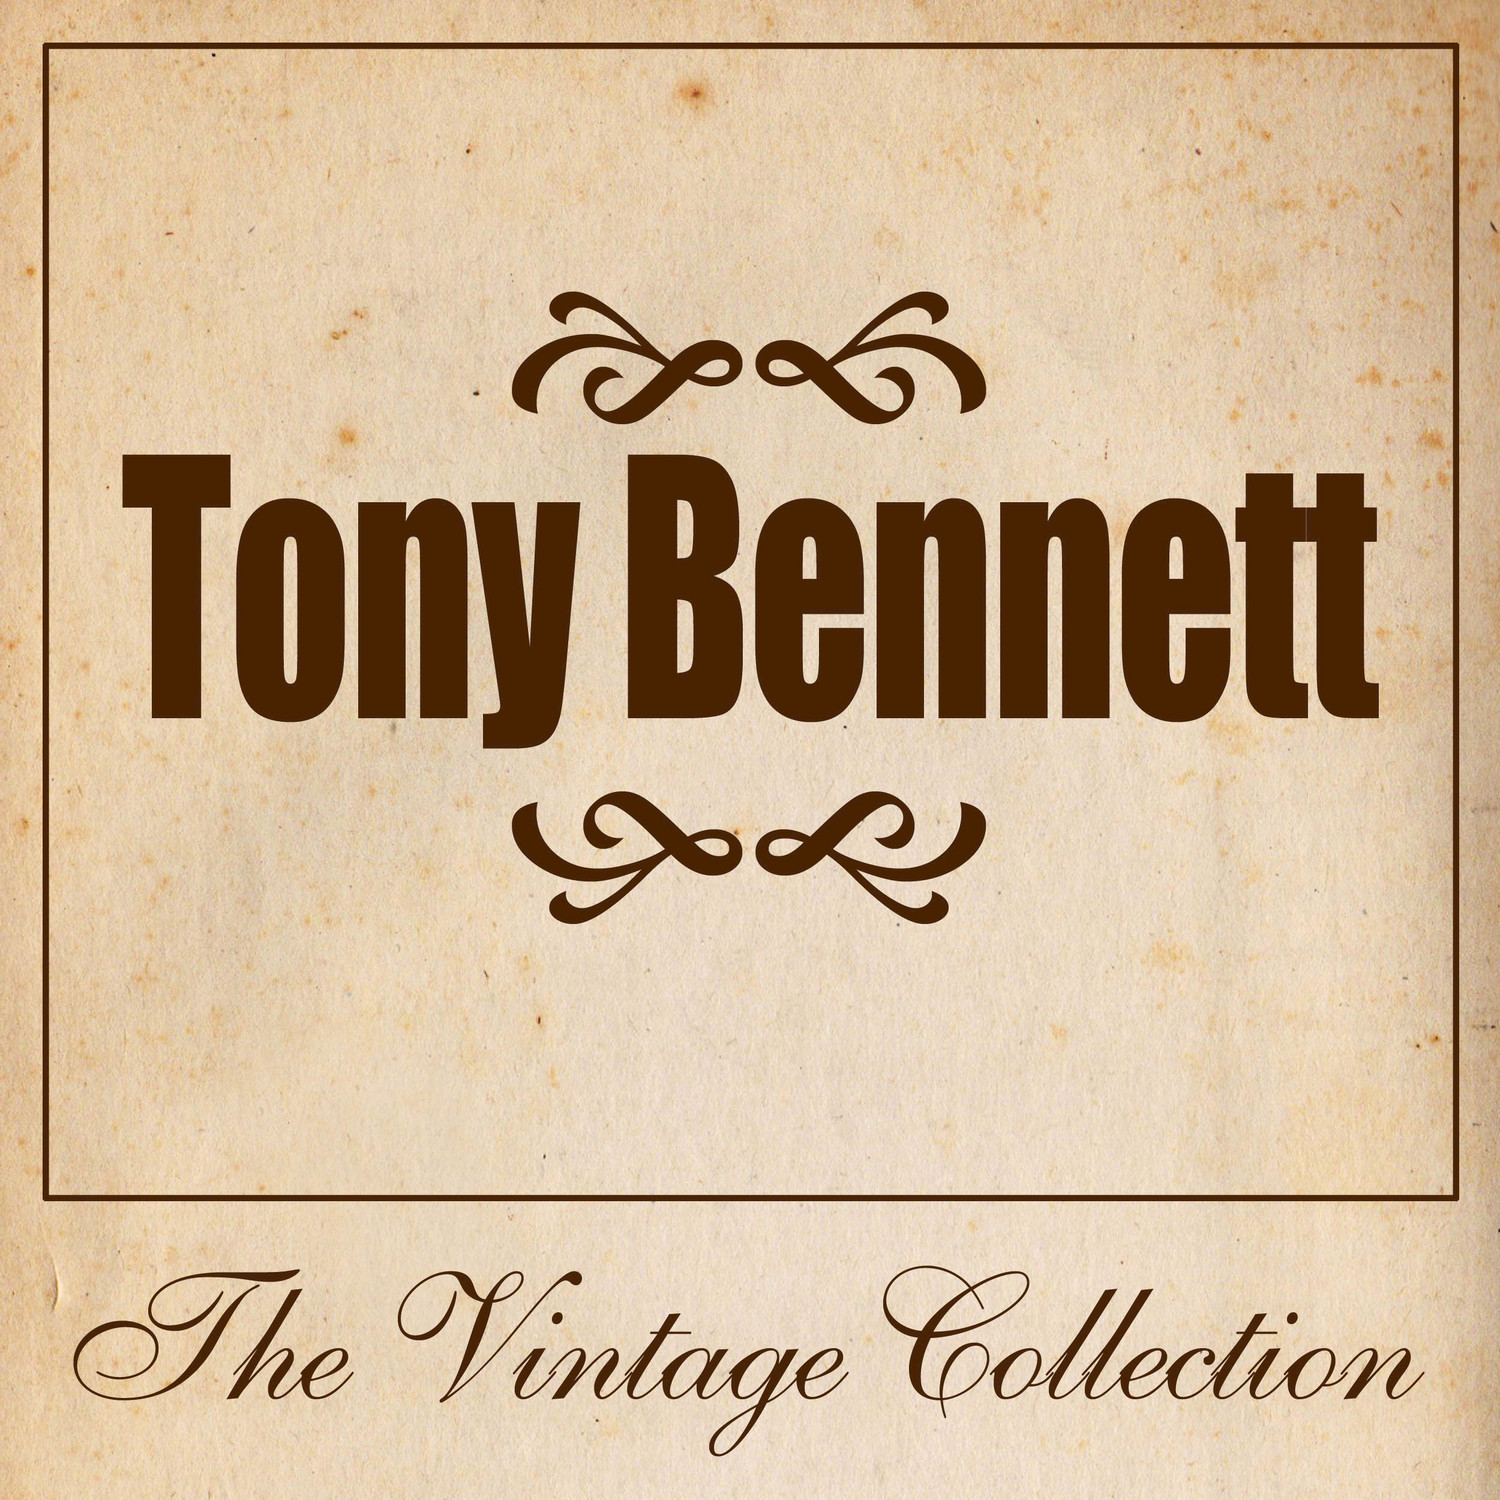 Tony Bennett - The Vintage Collection